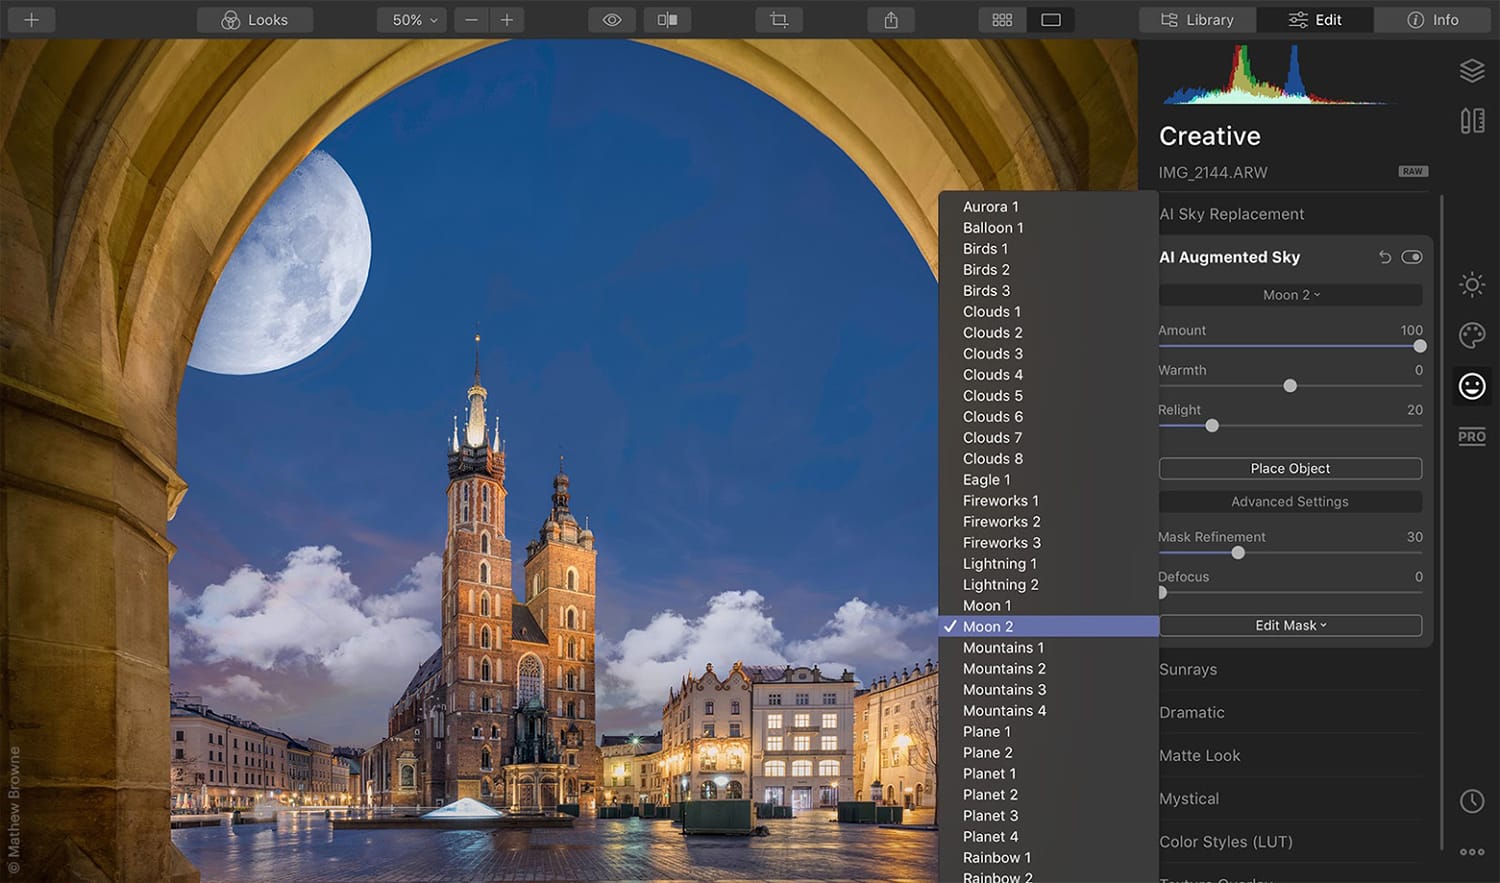 getting started with luminar neo